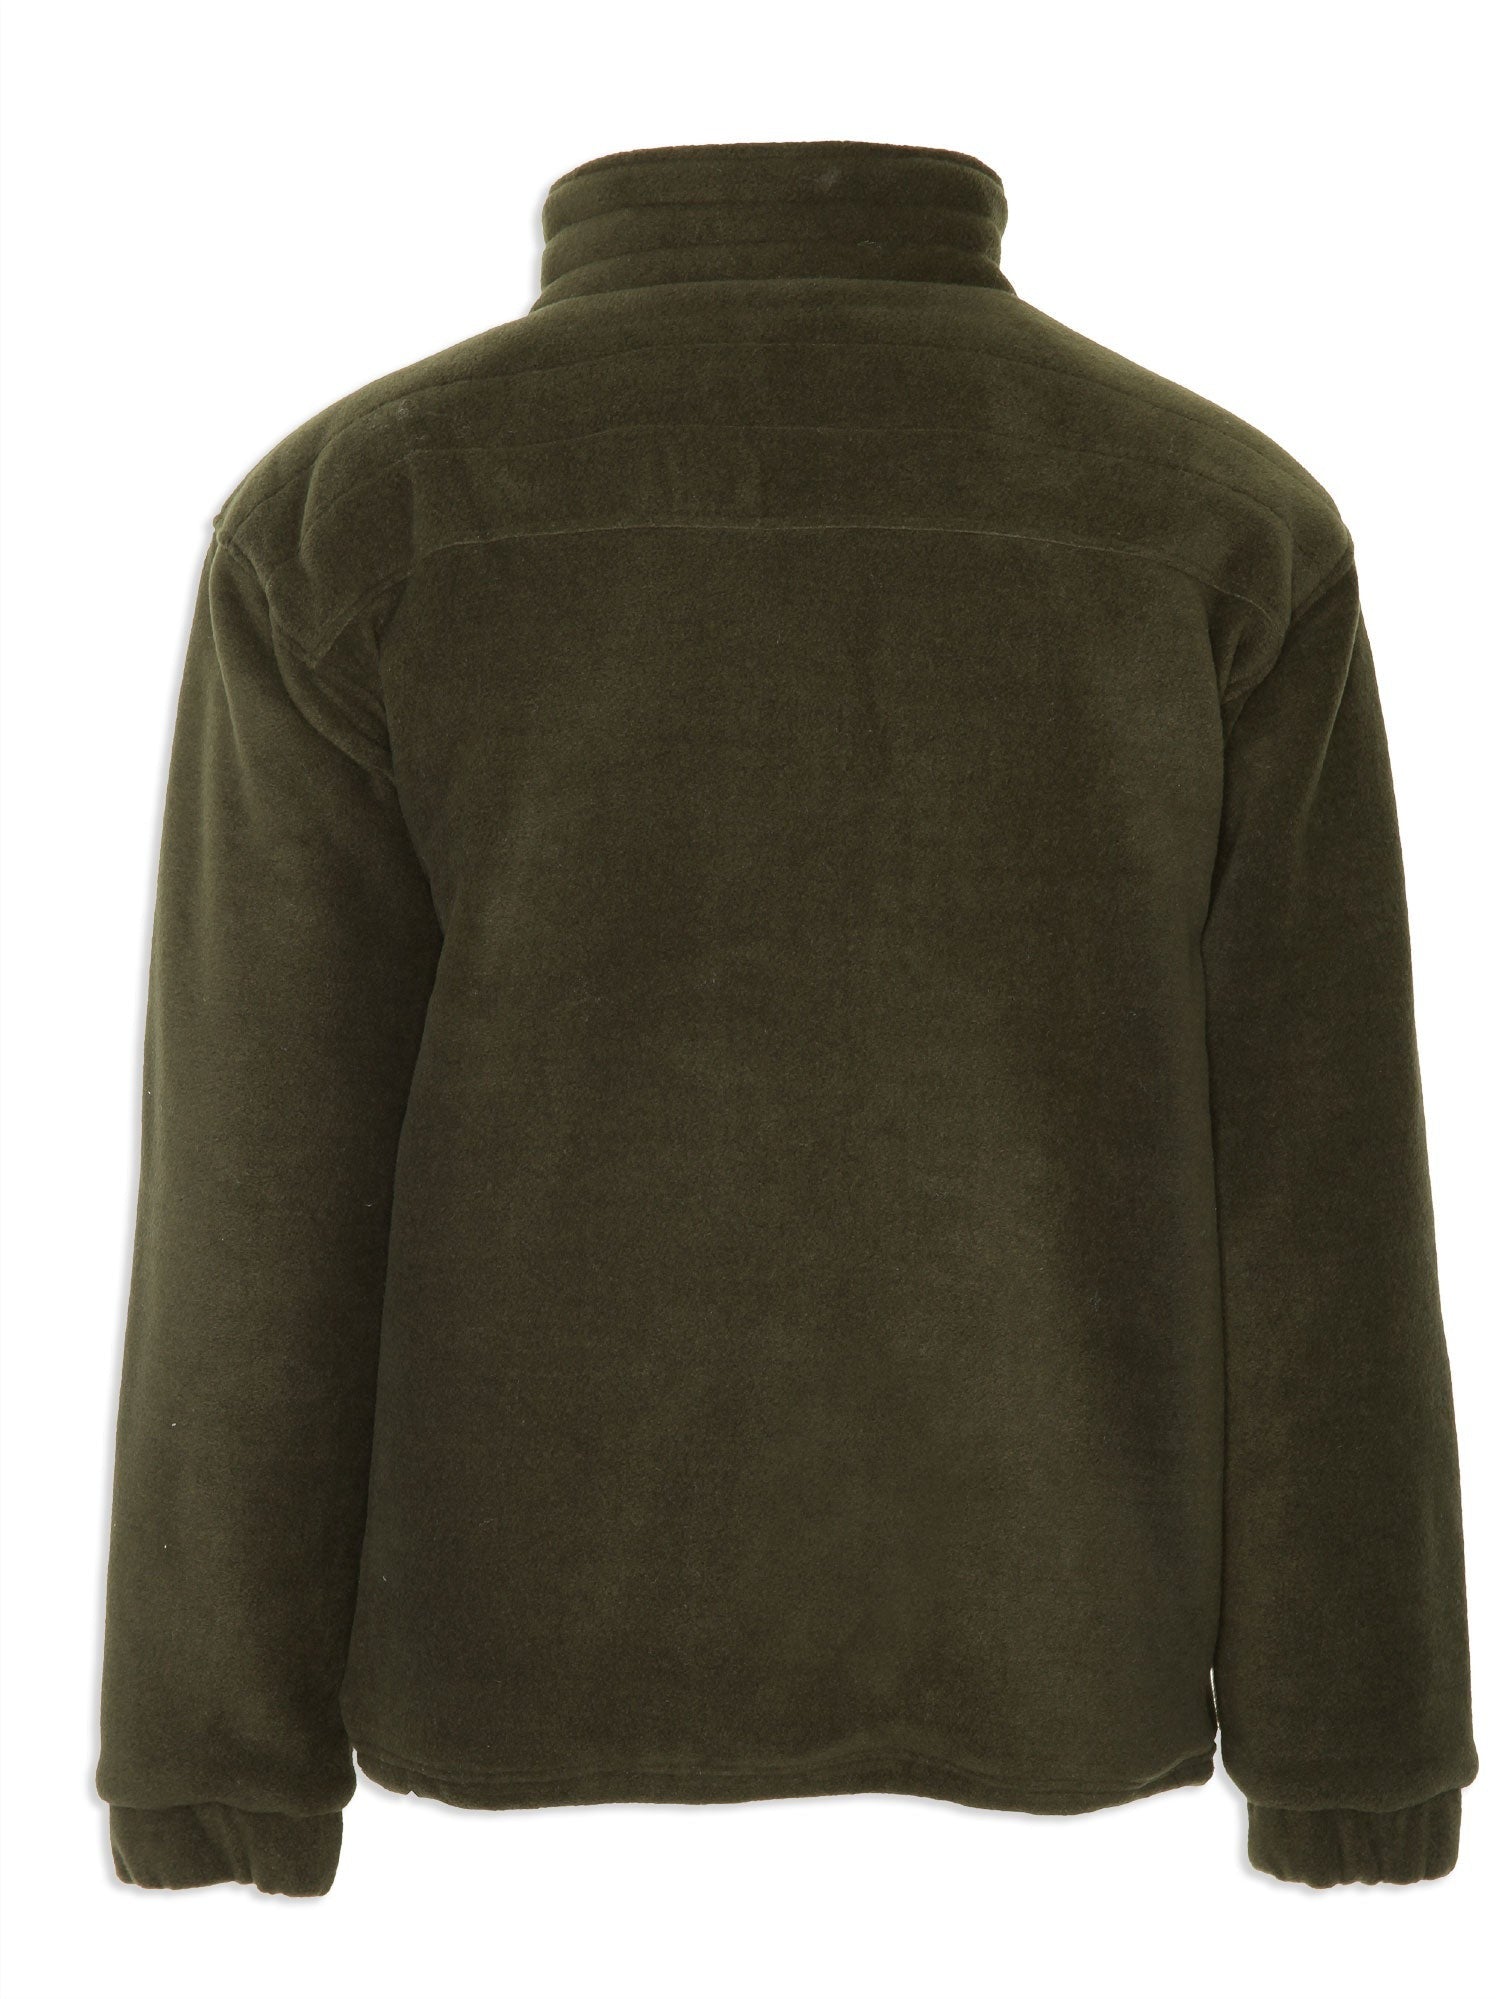 Back view Glen Lined Fleece Jacket from Champion in olive 